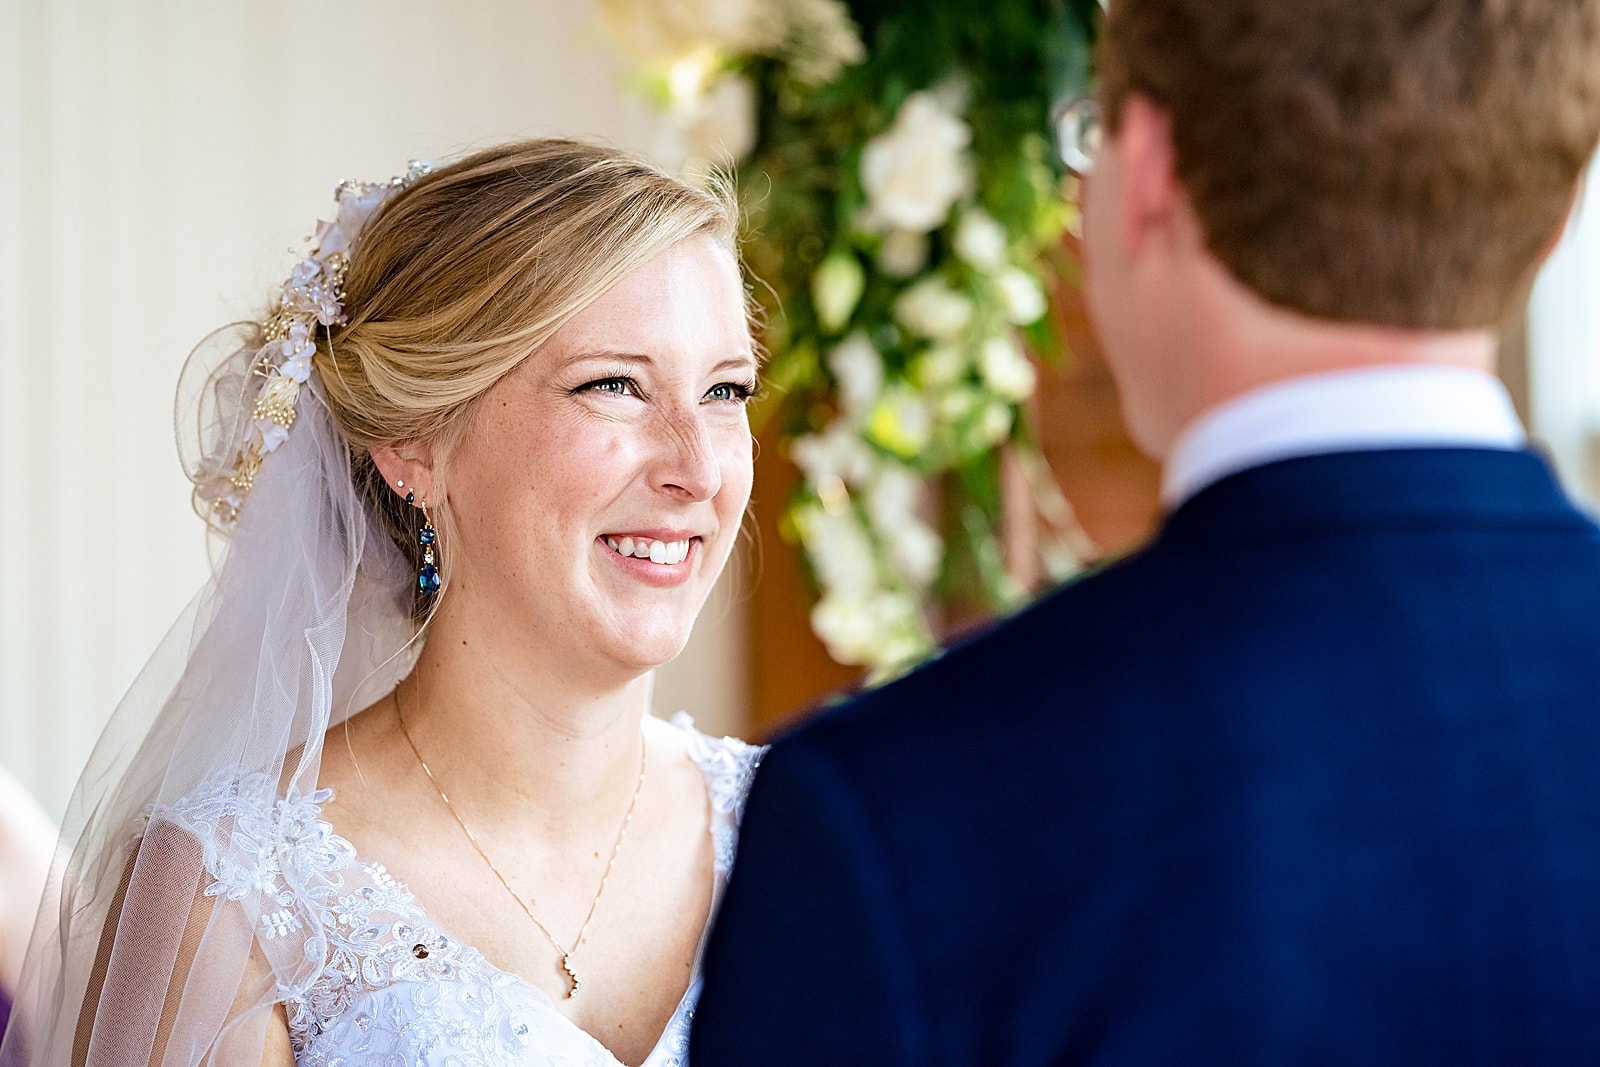 You should be this full of smiles slash tears at your wedding!